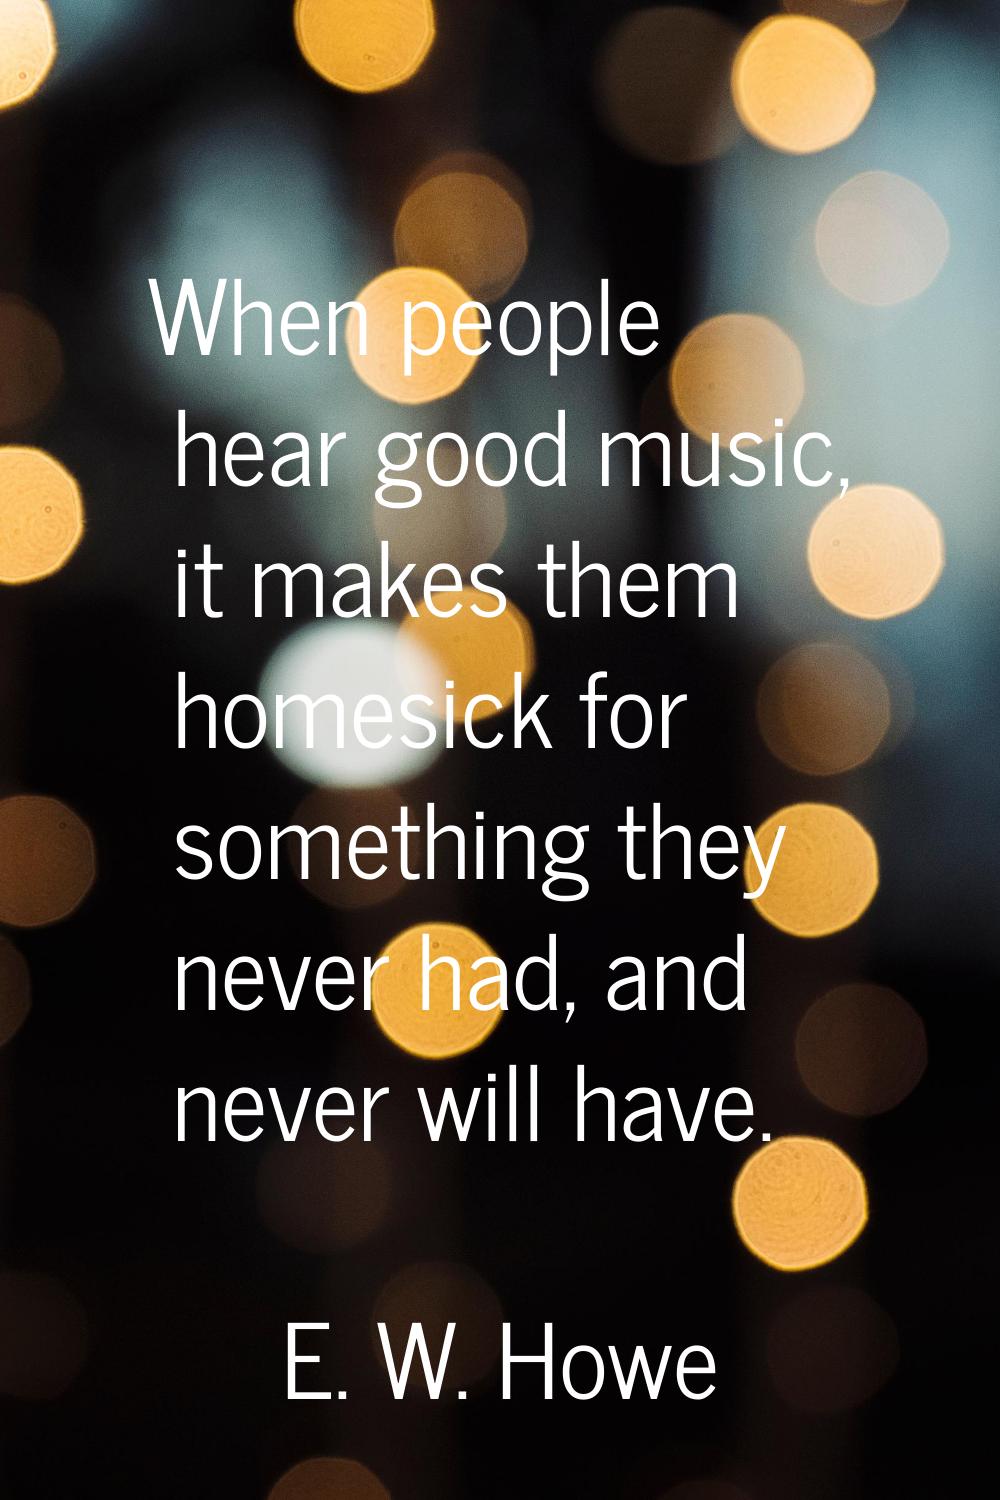 When people hear good music, it makes them homesick for something they never had, and never will ha